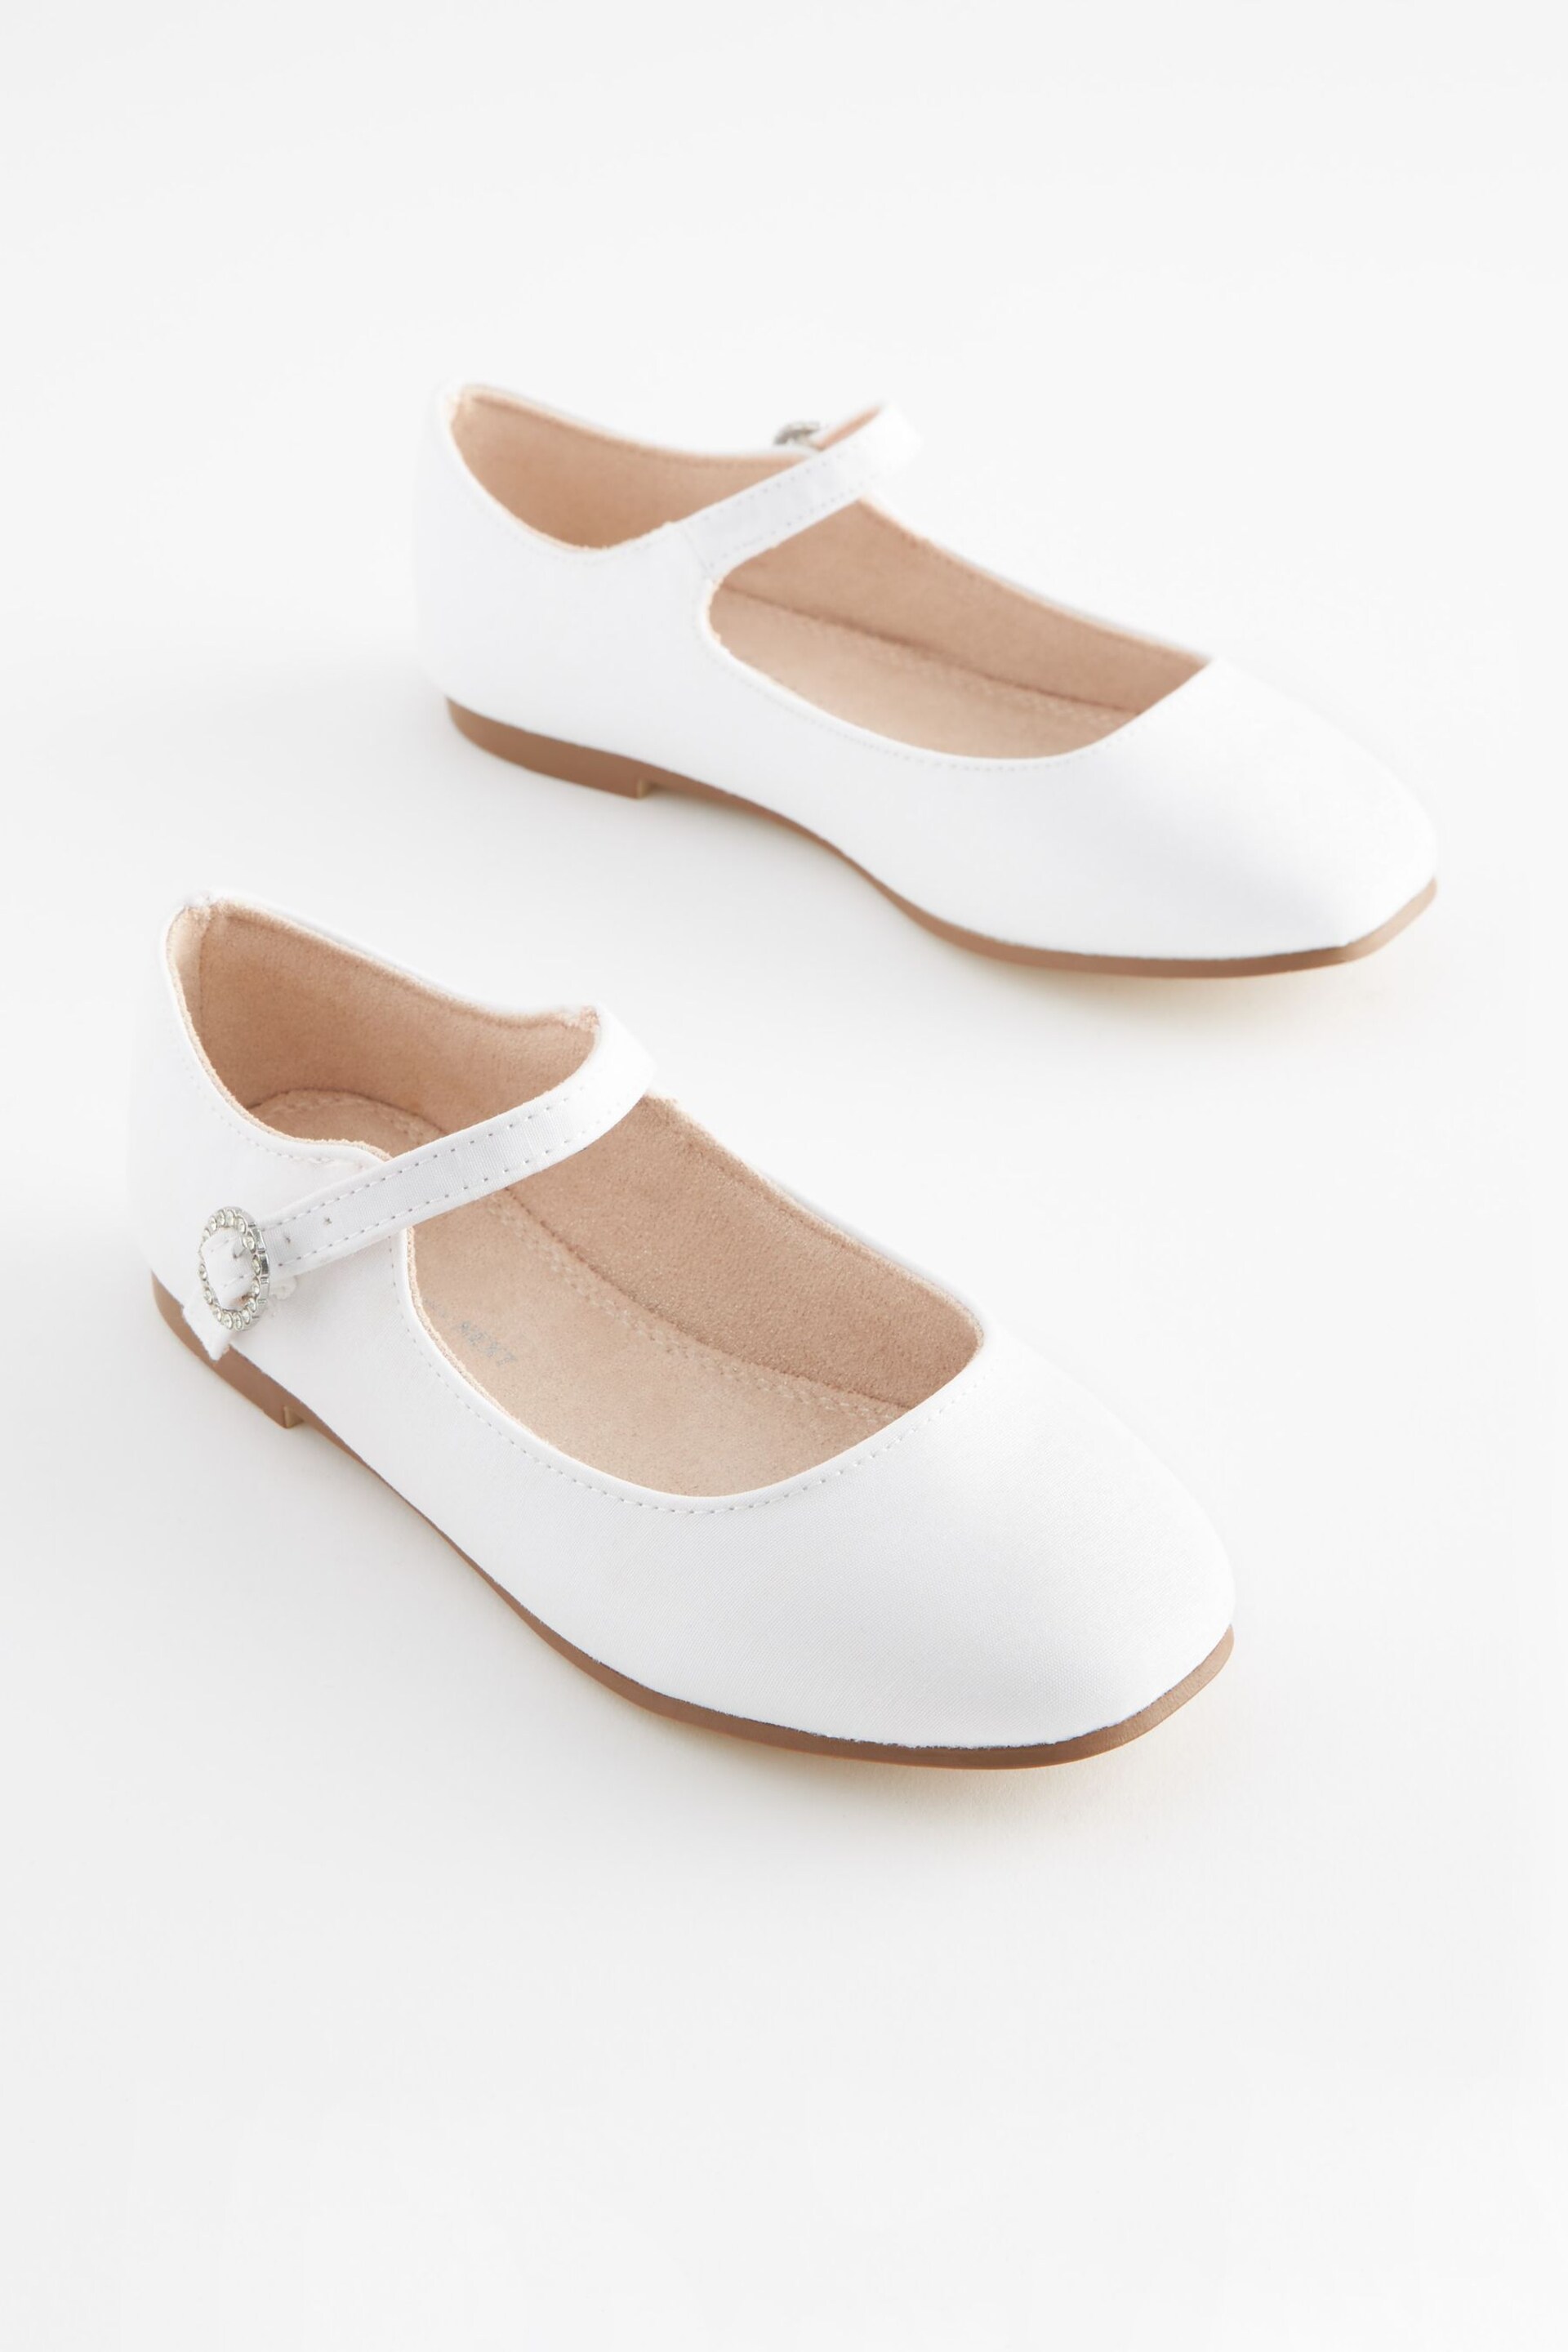 White Satin (Stain Resistant) Wide Fit (G) Square Toe Mary Jane Occasion Shoes - Image 1 of 5